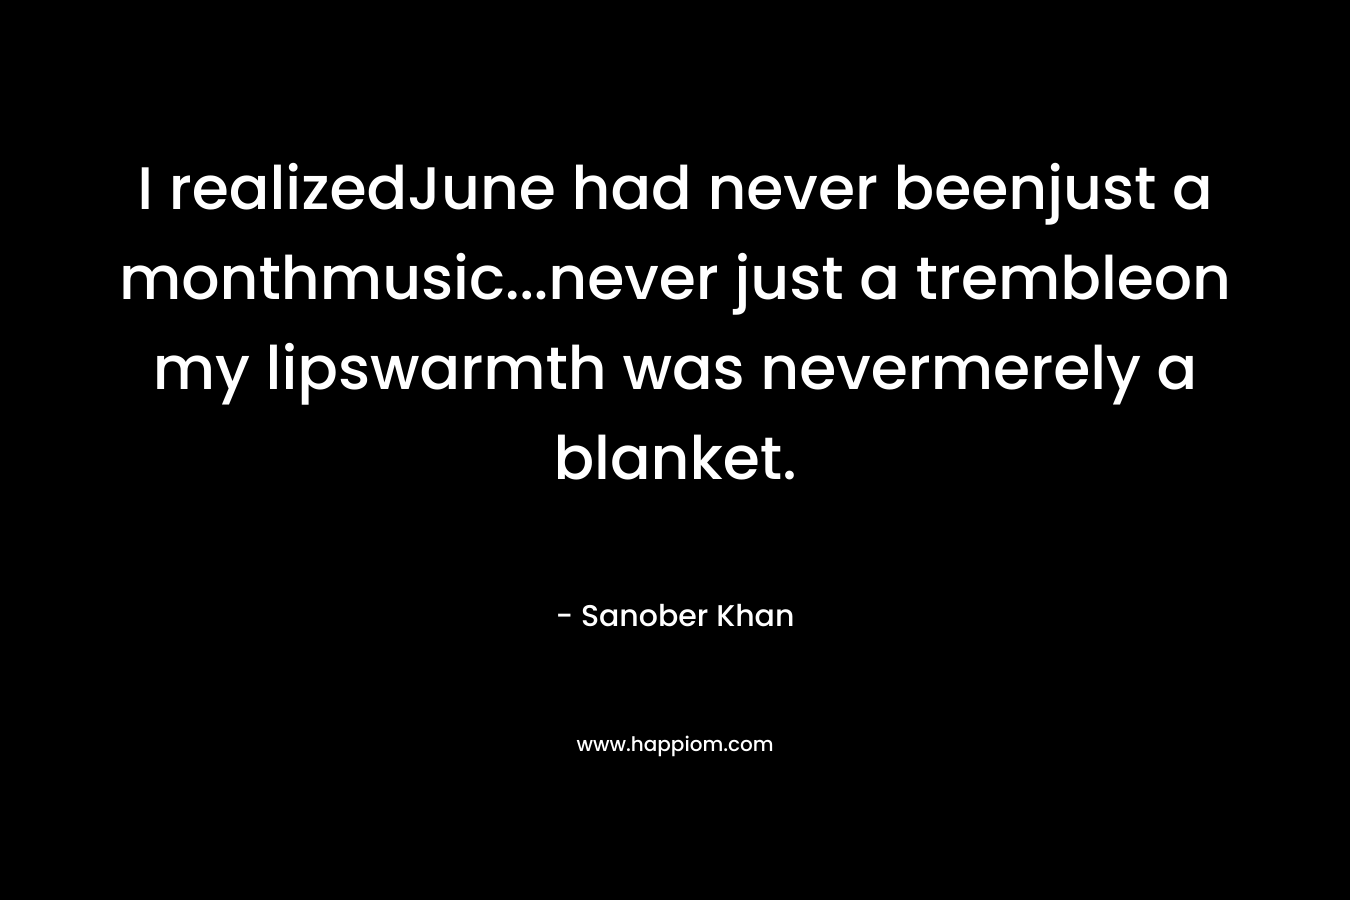 I realizedJune had never beenjust a monthmusic…never just a trembleon my lipswarmth was nevermerely a blanket. – Sanober  Khan